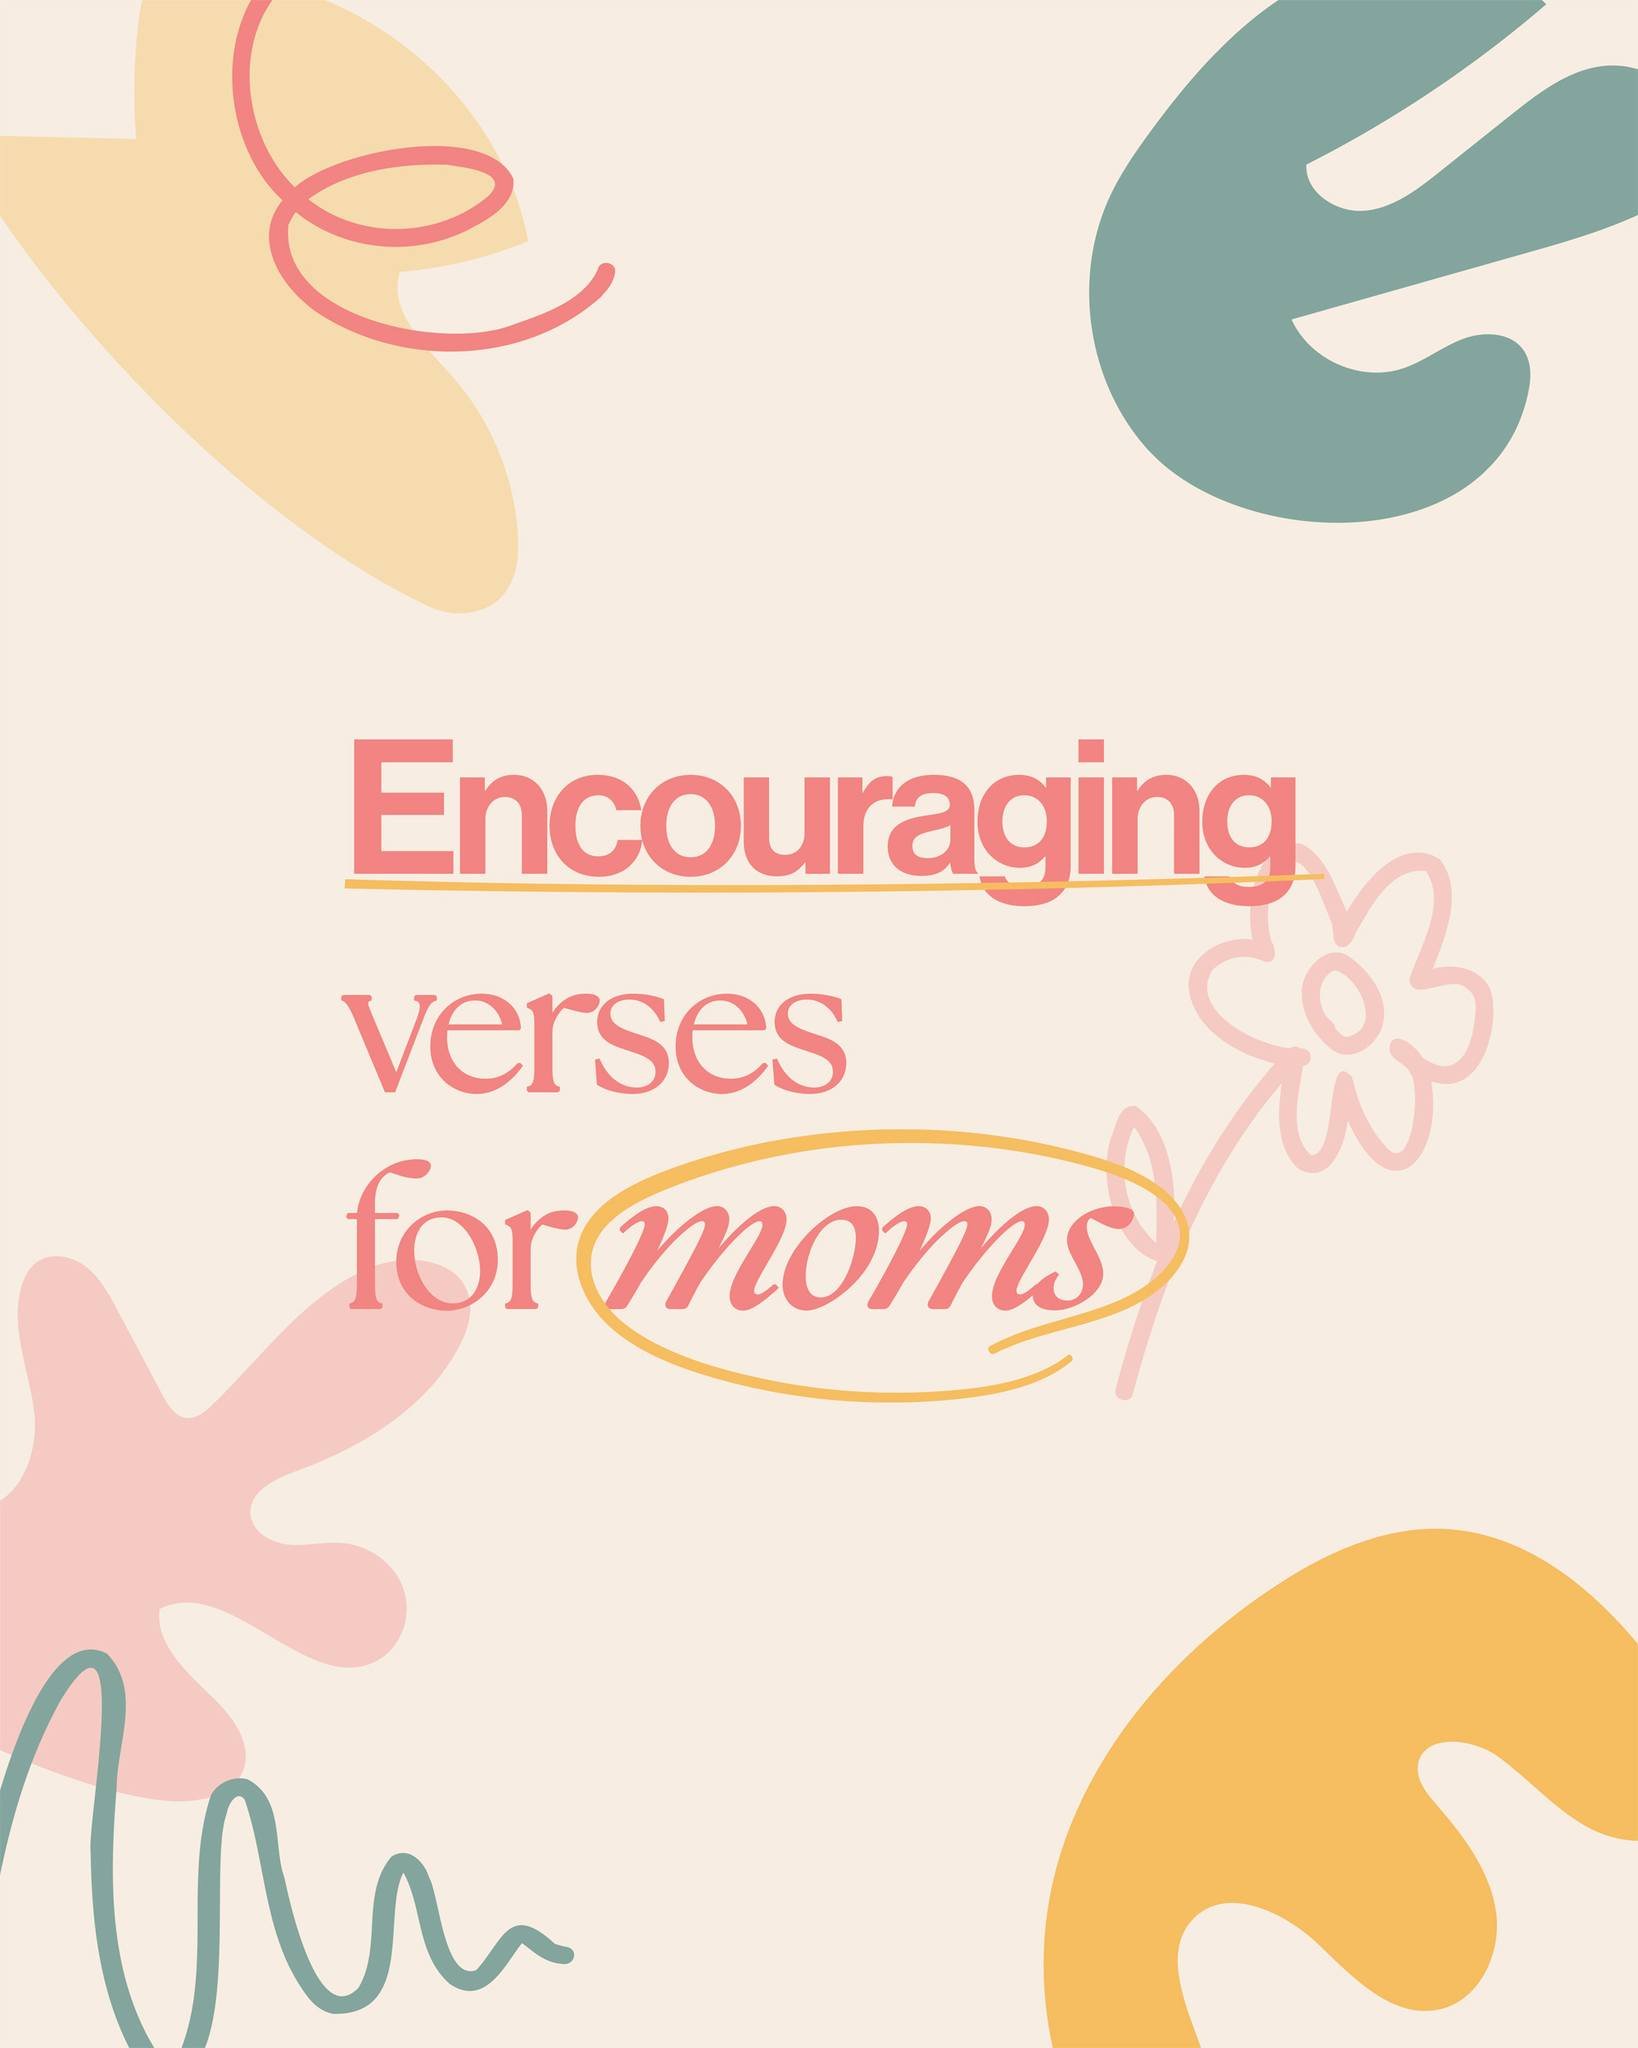 Whatever season you find yourself in, moms, the Word of God is filled with encouragement to meet your needs.

Send this to a mom who needs encouragement. 💐 Also, invite her to church this Sunday 😊